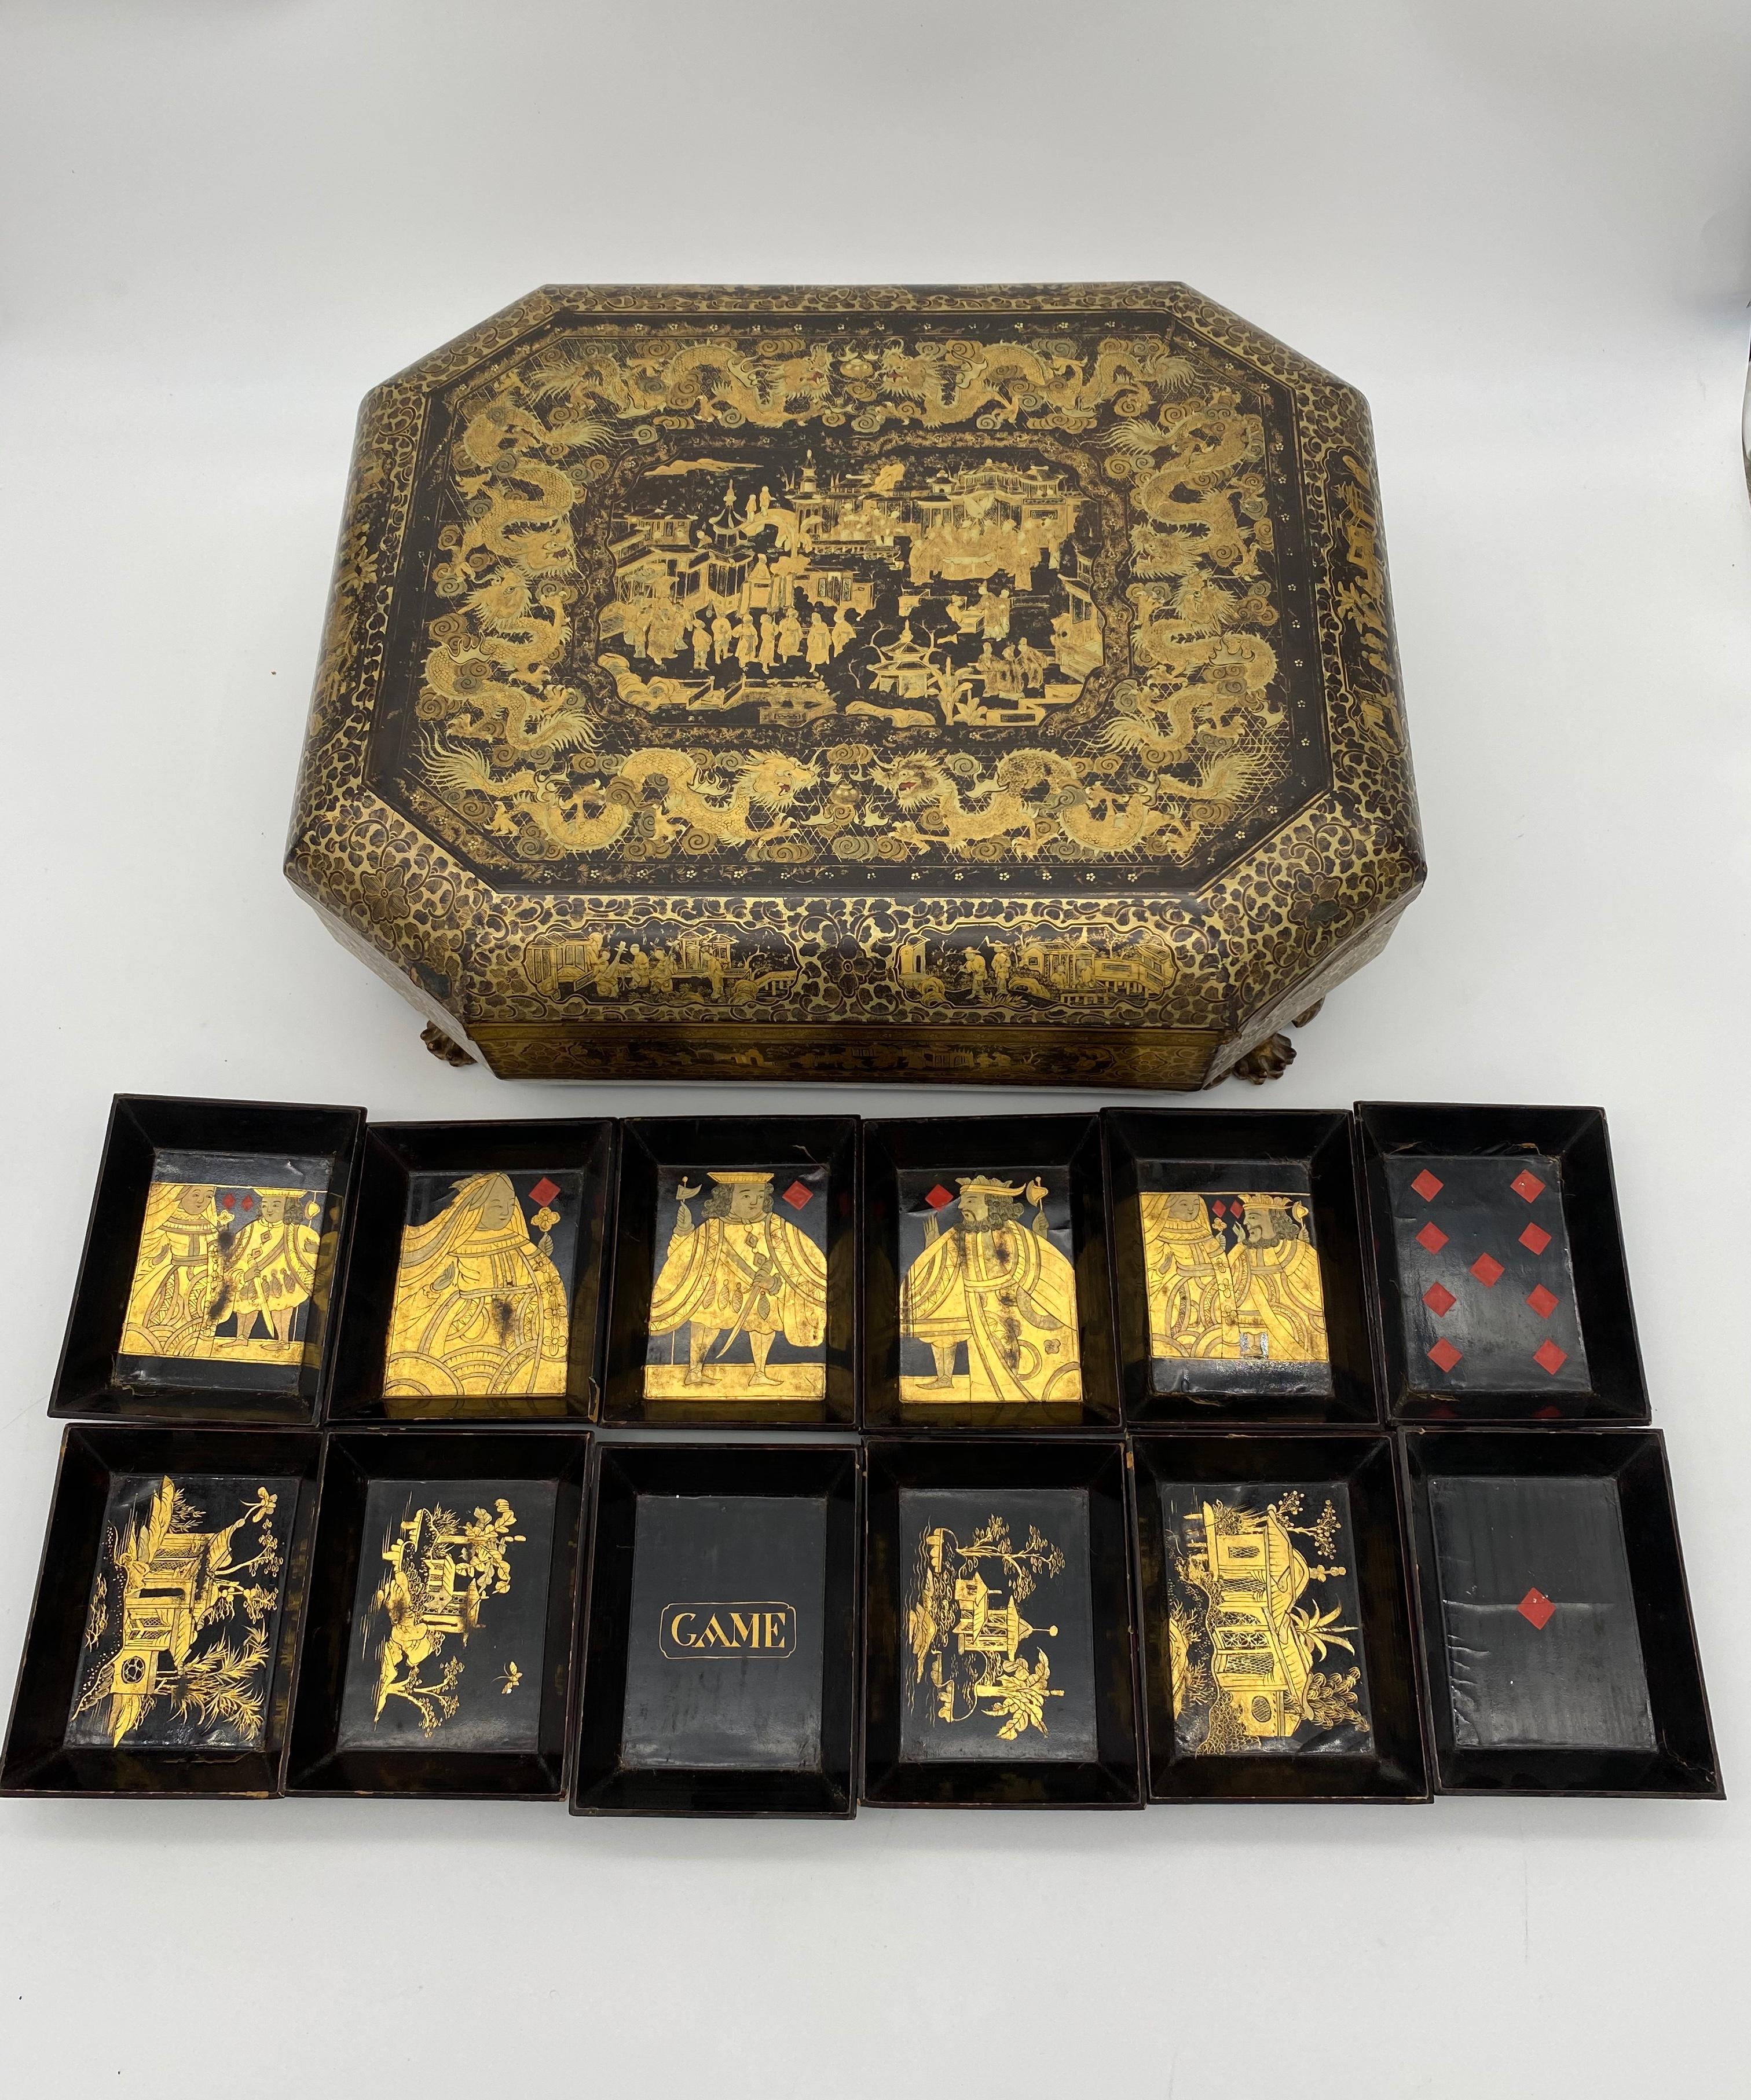 Antique 19th Century Export Chinese Lacquer Gaming Box For Sale 1